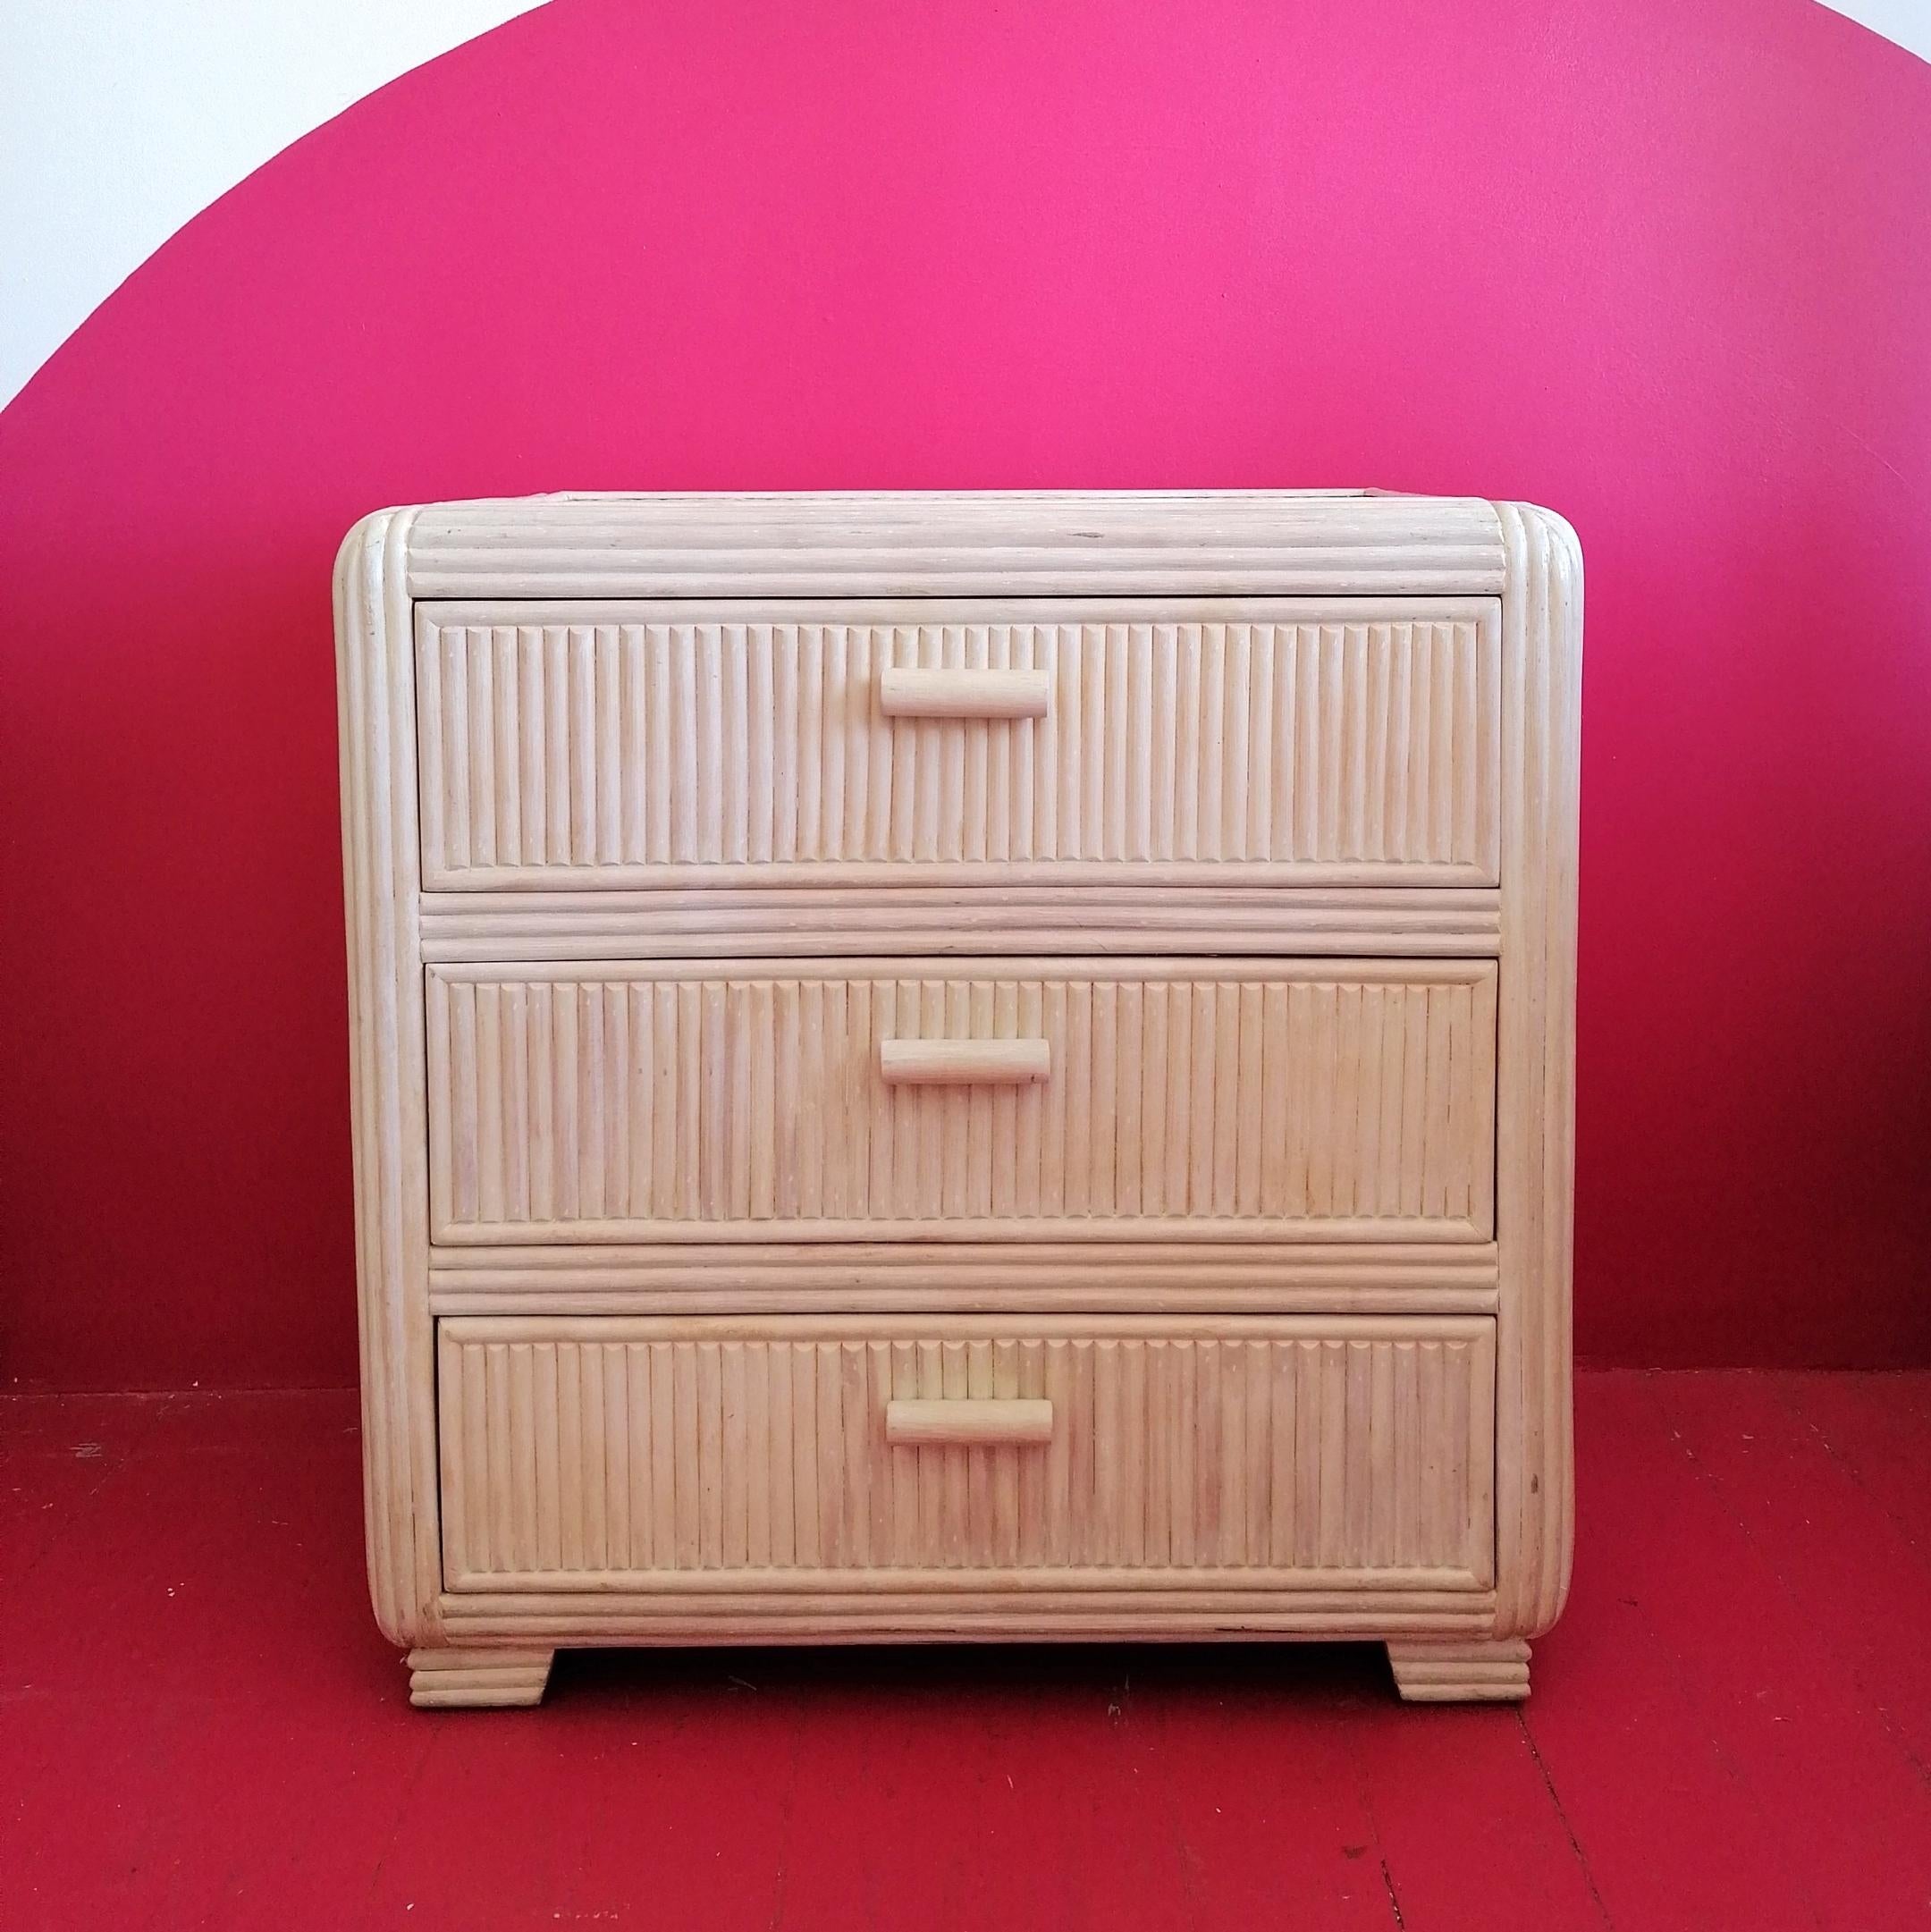 Vintage American cane chest of three drawers with rattan top, in original blonde finish.

Dimensions: width 76cm, depth 45cm, height 76.5cm